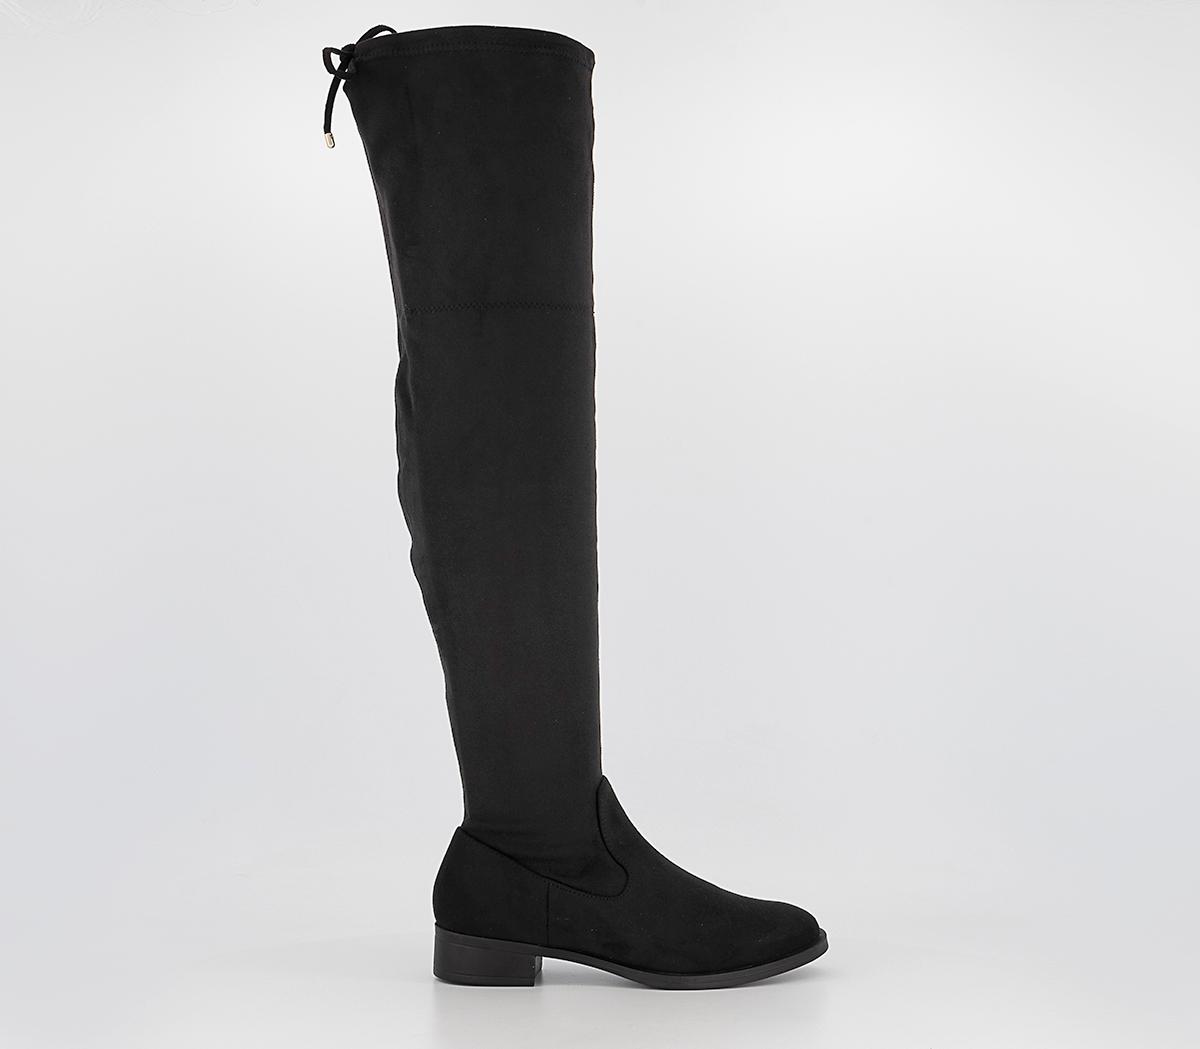 OFFICEKai Stretch Over The Knee BootsBlack